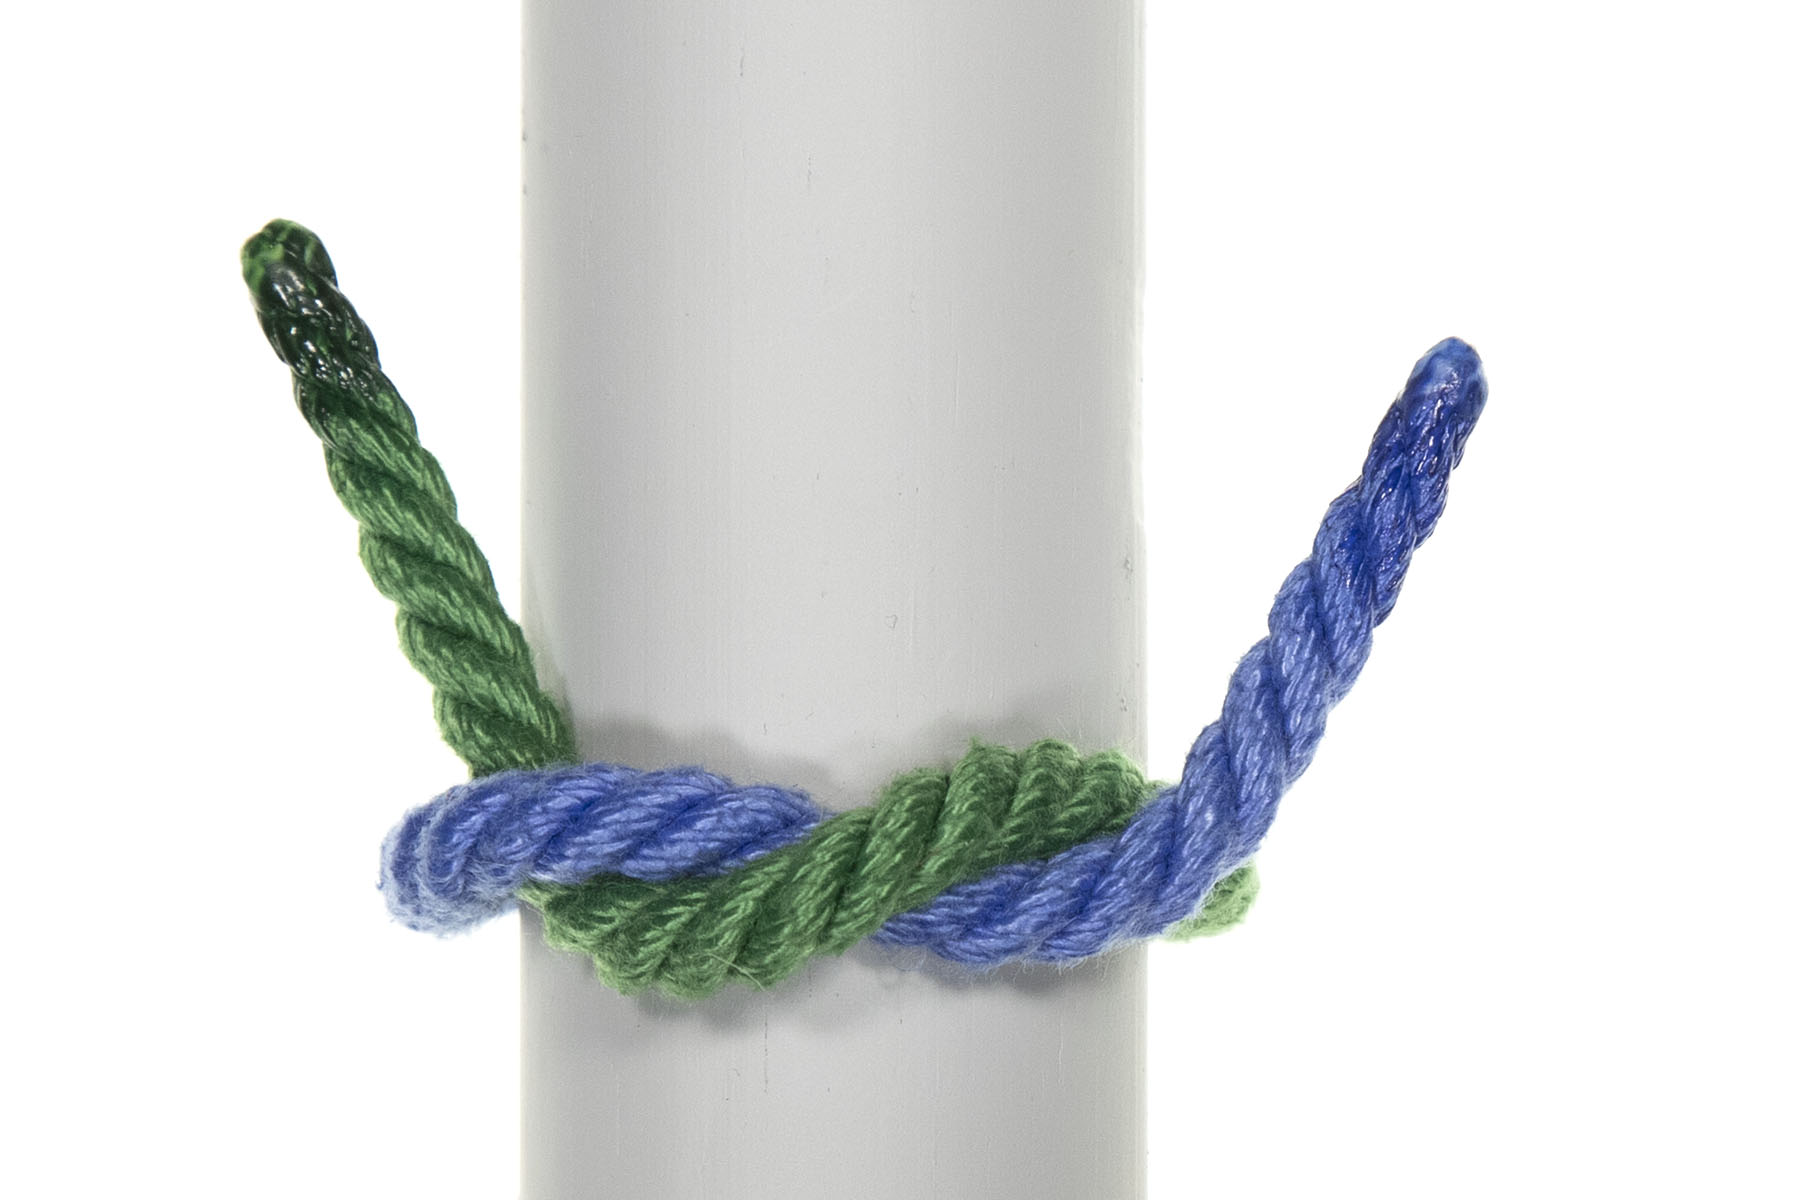 The blue rope is in approximately the same position as before, but has crossed under, around, and over the green rope once, so the two ropes are now twisted together. The blue rope goes over, under, and over the green rope, and the green rope goes under, over, and under the blue rope.